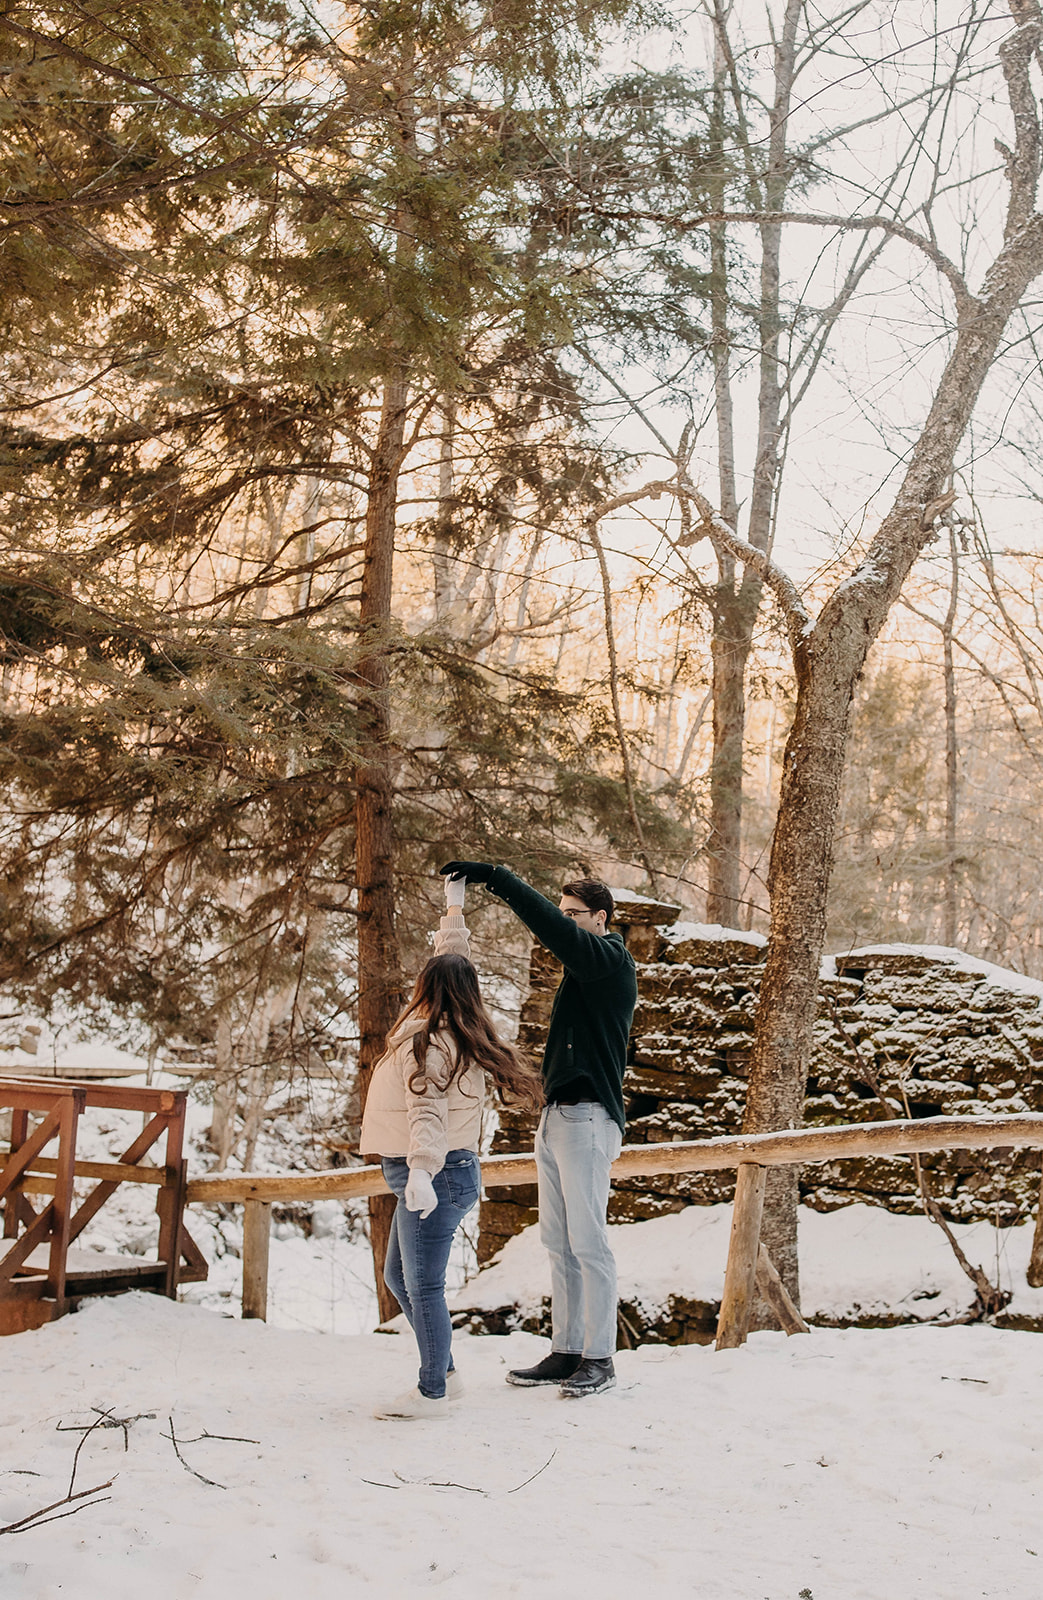 Stunning snowy winter engagement photos at Huyck preserve in Rensselaerville New York!